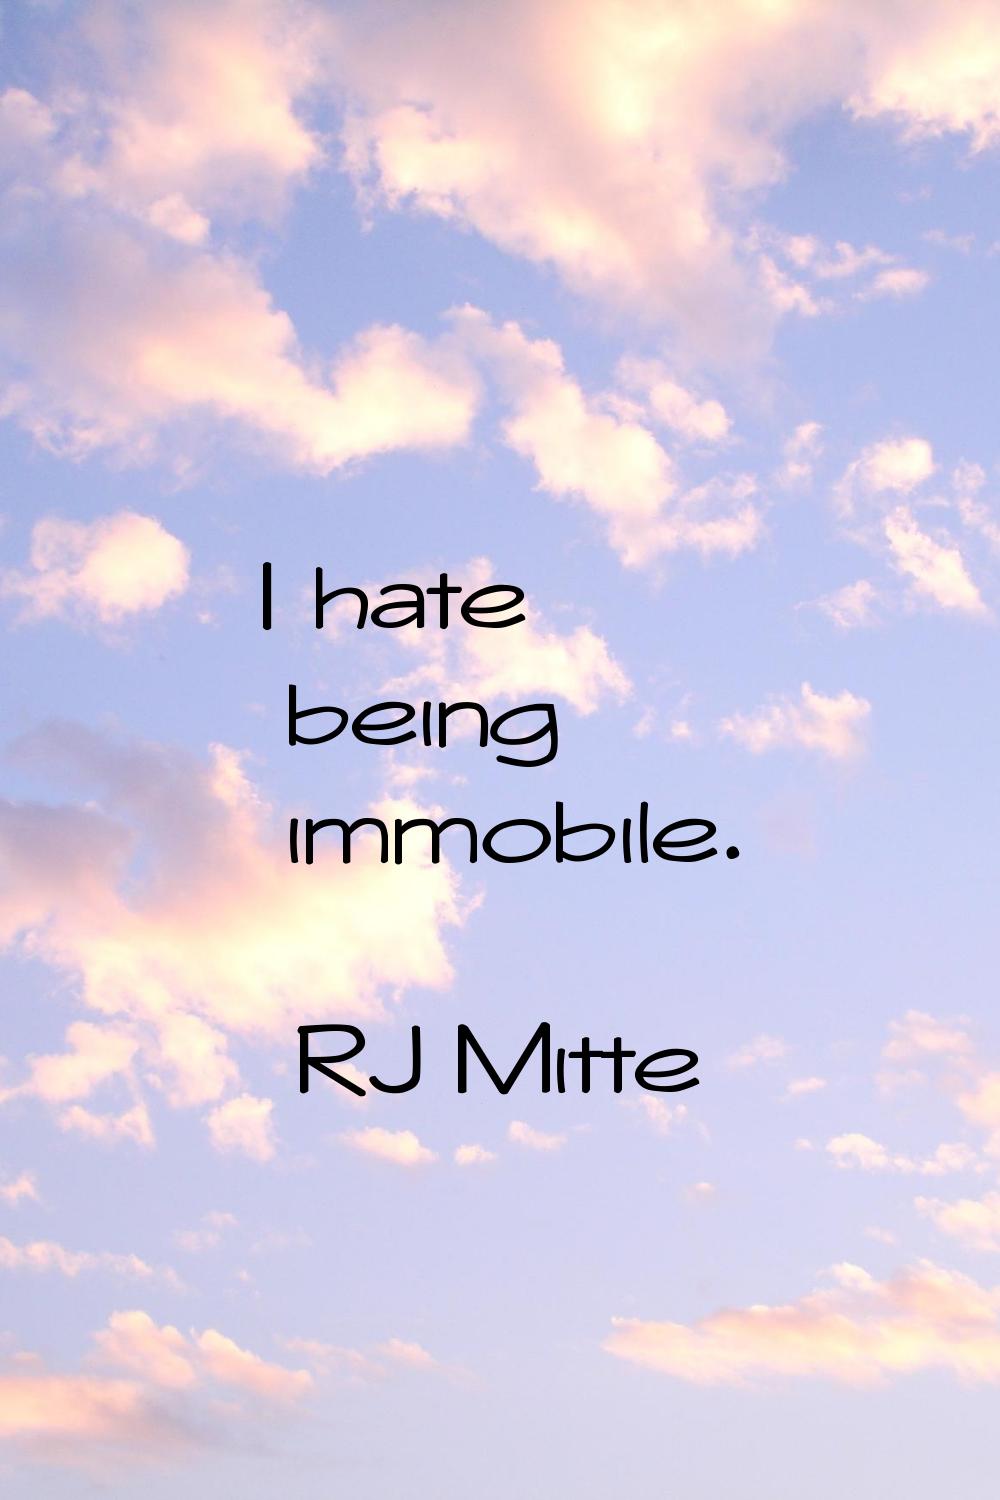 I hate being immobile.